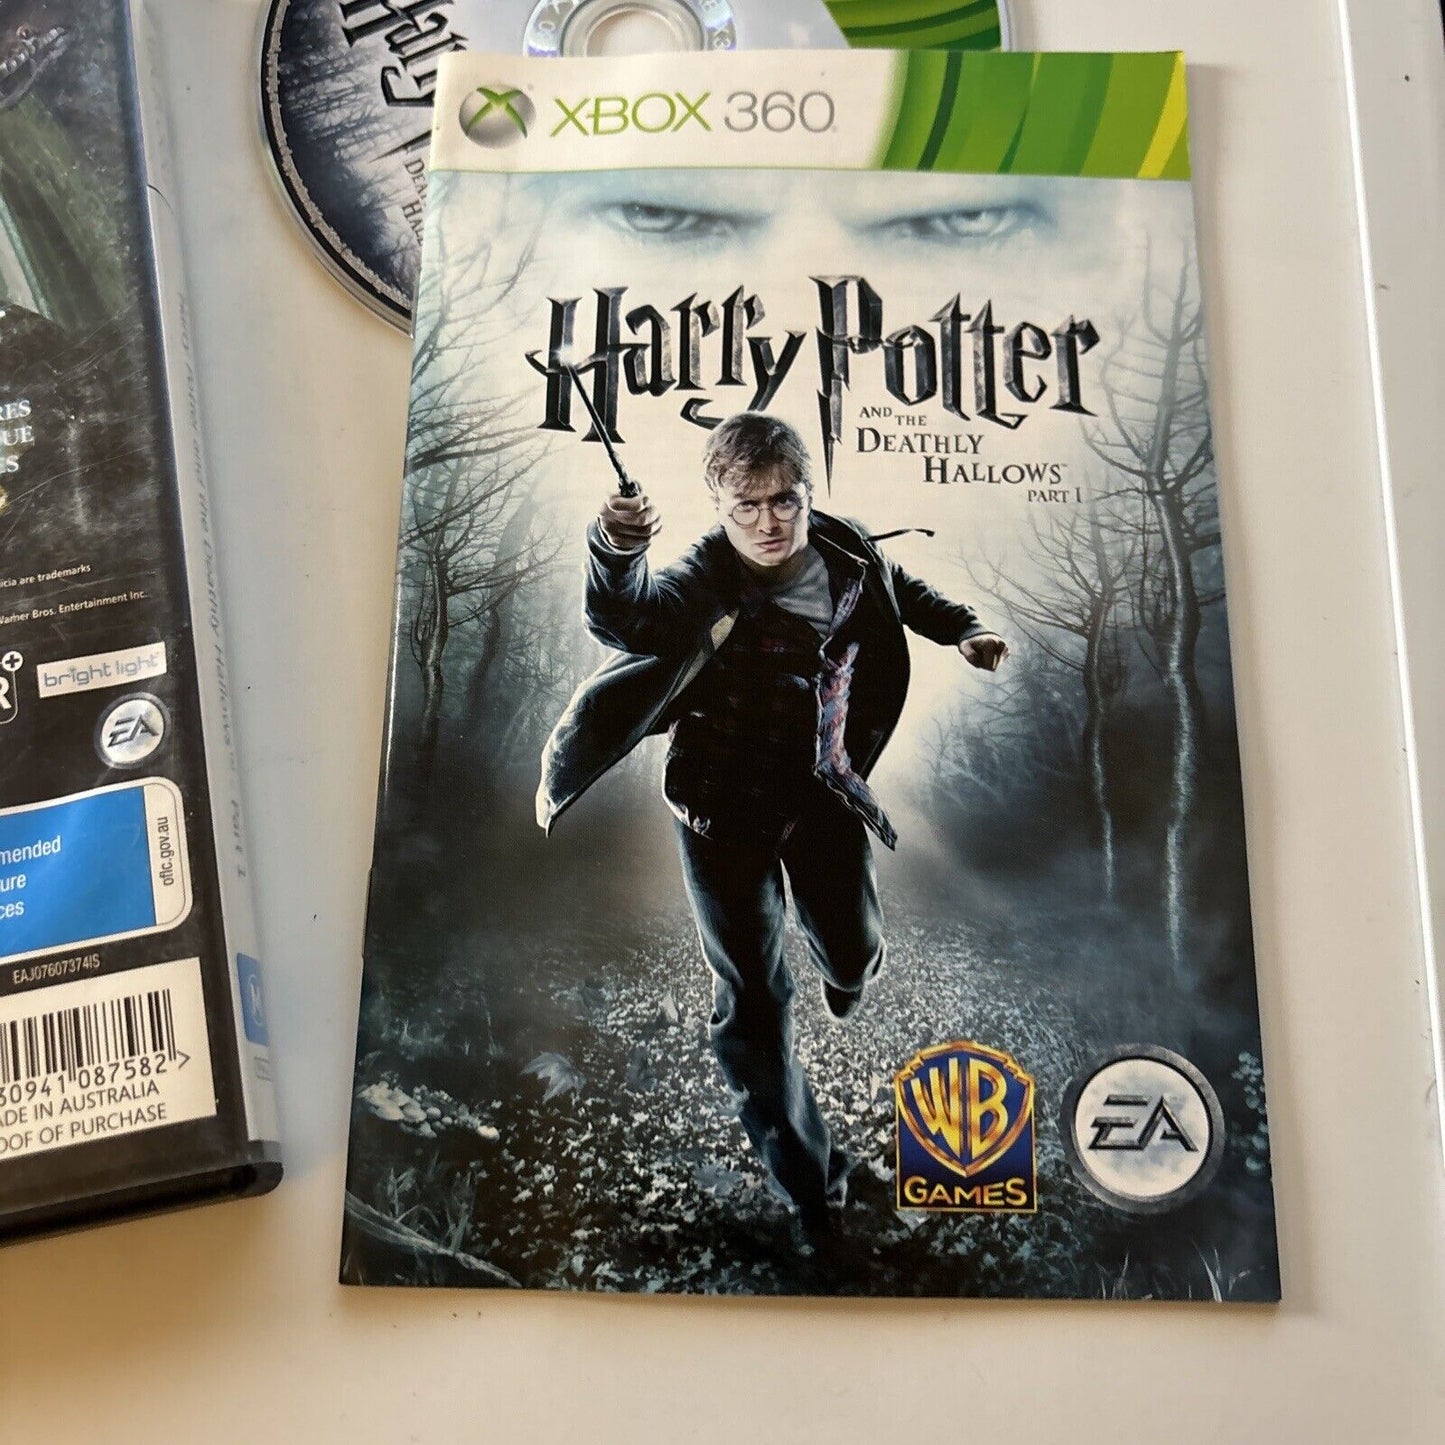 Harry Potter & the Deathly Hallows Part 1 - Microsoft Xbox 360 - PAL - Manual